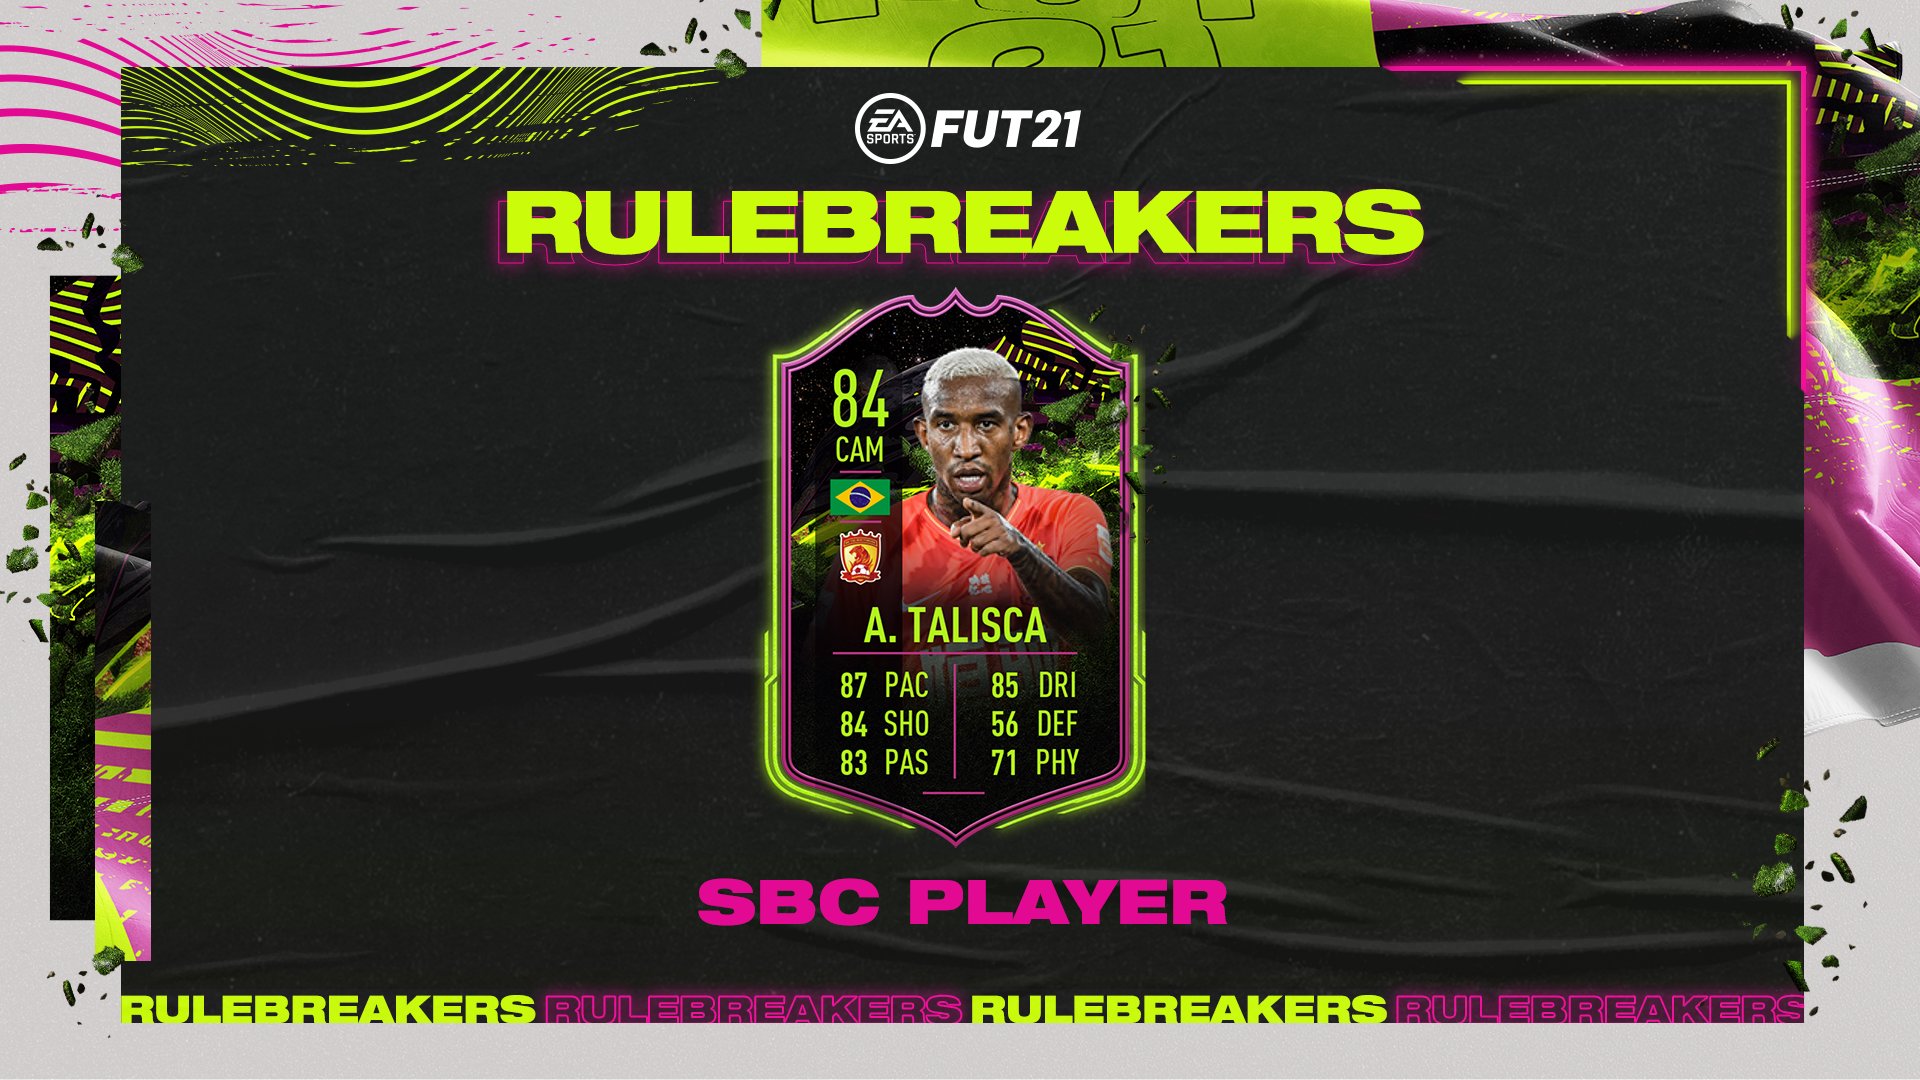 Should You Do The Anderson Talisca Rulebreakers SBC In FIFA 21? Brilliant Card, Hard To Link